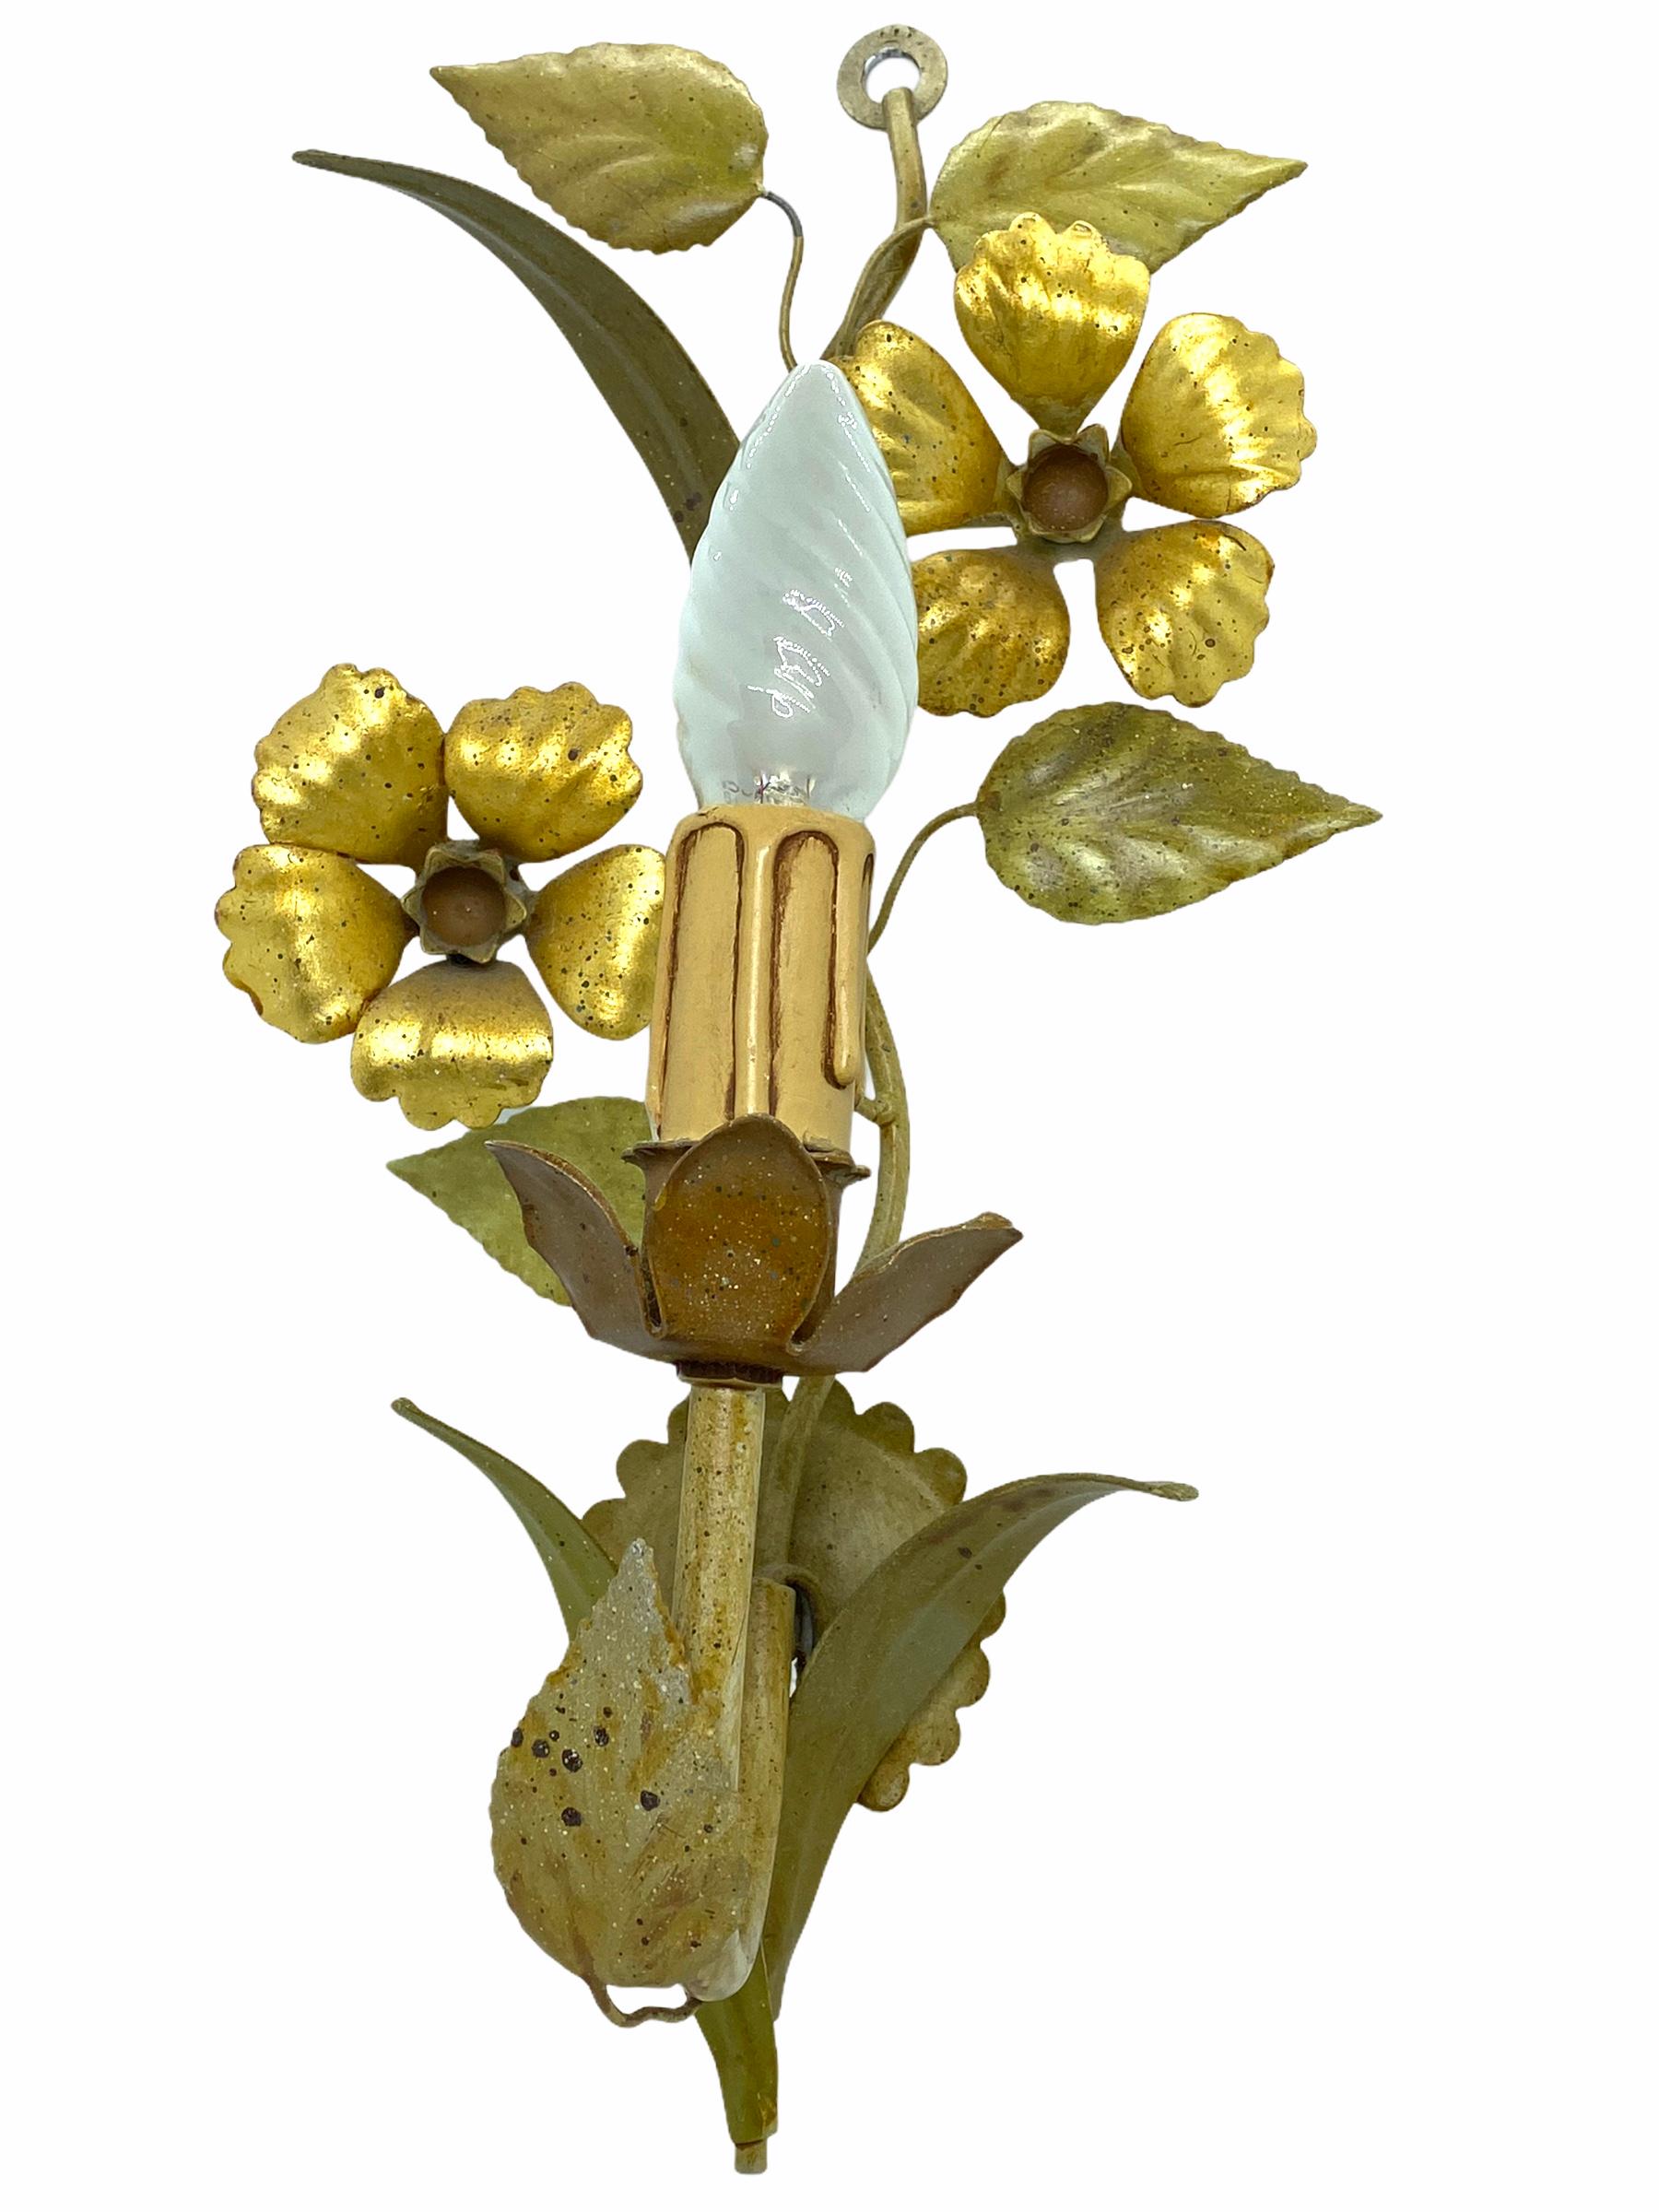 A pair of Hollywood Regency midcentury flower and leaf Florentine sconces, each fixture requires one European E14 candelabras bulb, up to 60 watts. The wall lights have a beautiful patina and give each room an eclectic statement. Polychrome frame